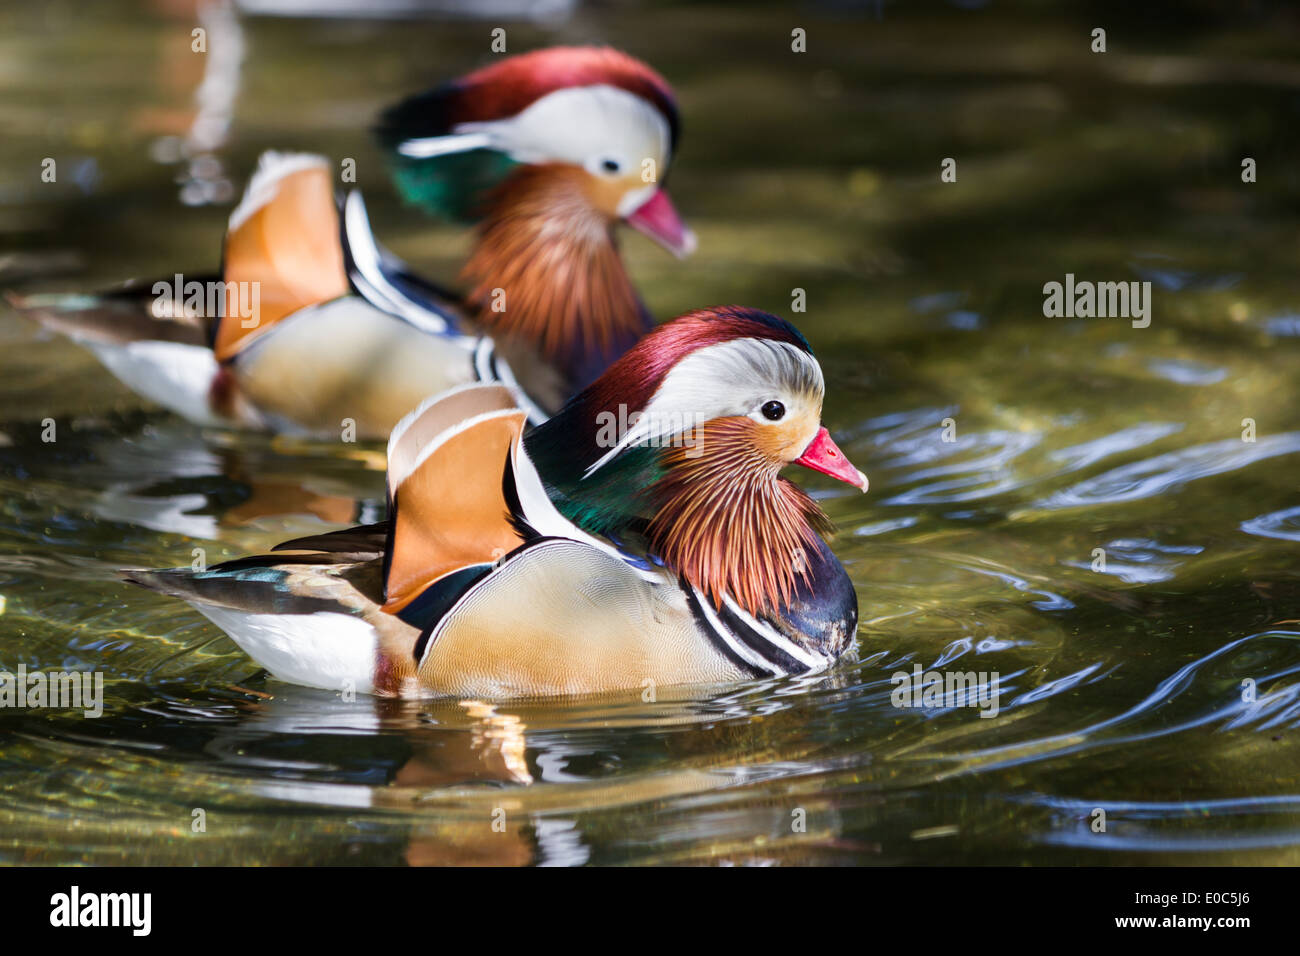 Mandarin Duck Couple Swimming Together In Beijing Lake Stock Photo   Download Image Now  iStock